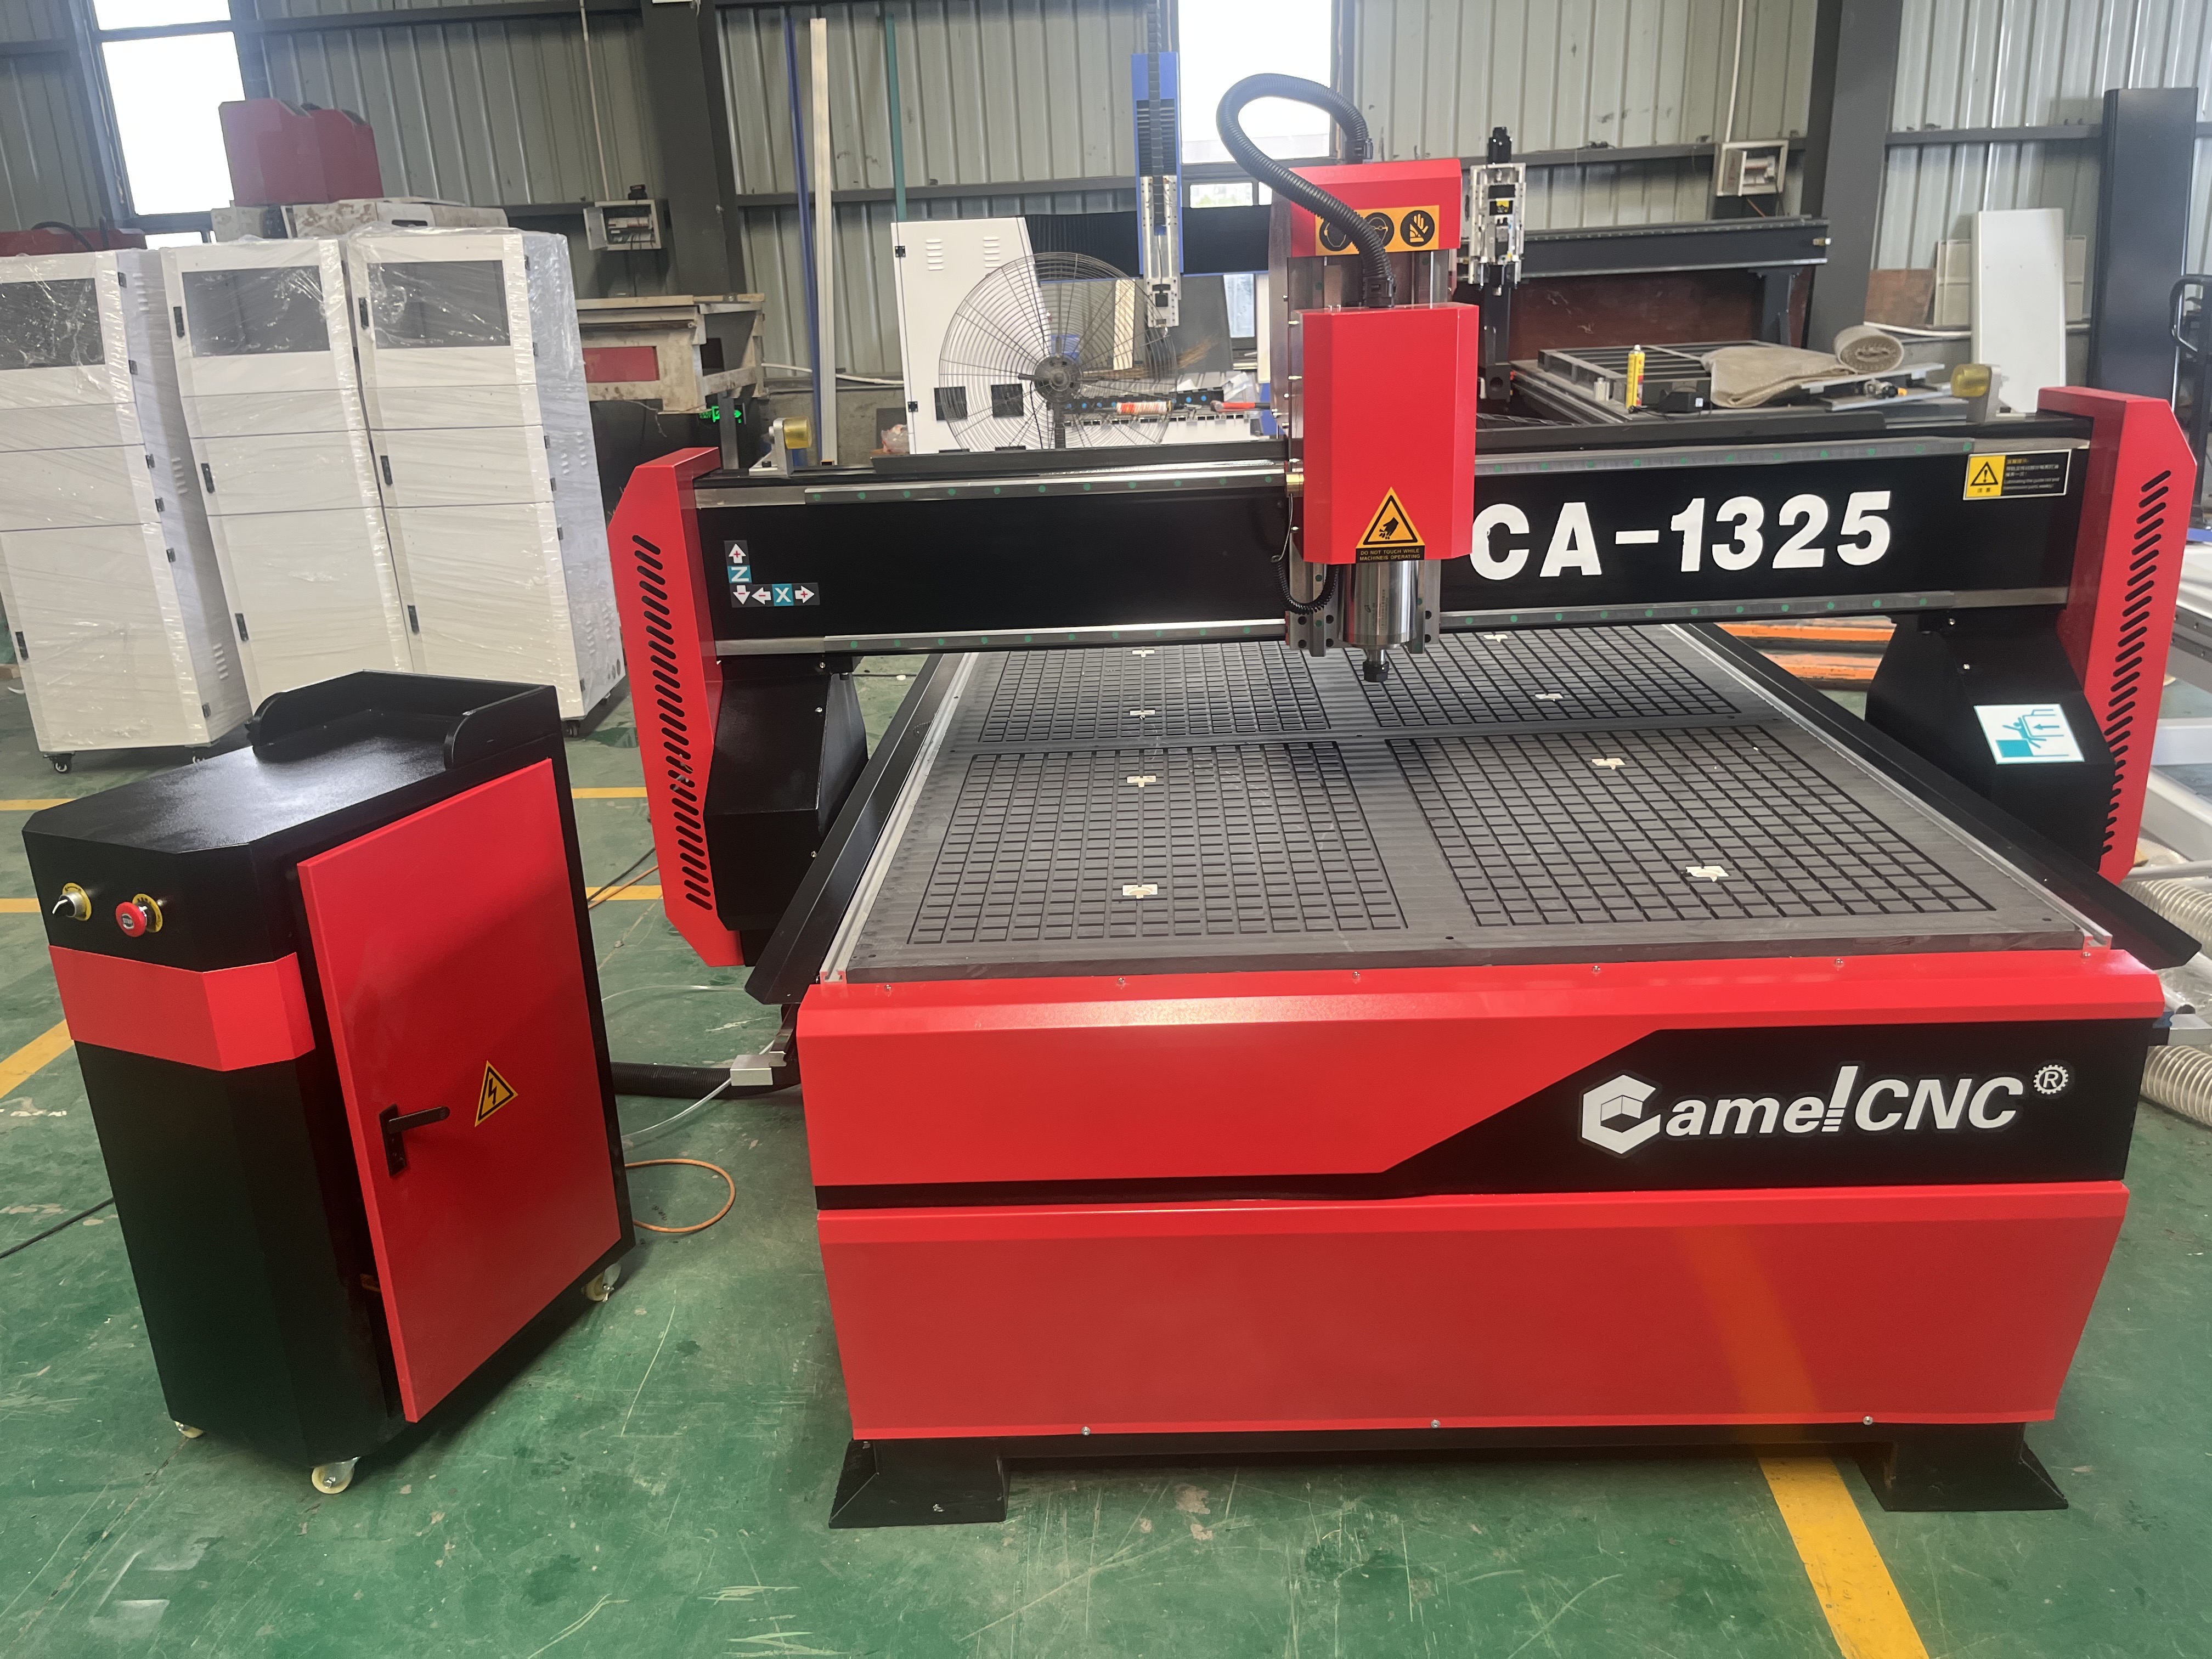  Professional CA-1325  cnc router  with vacuum table